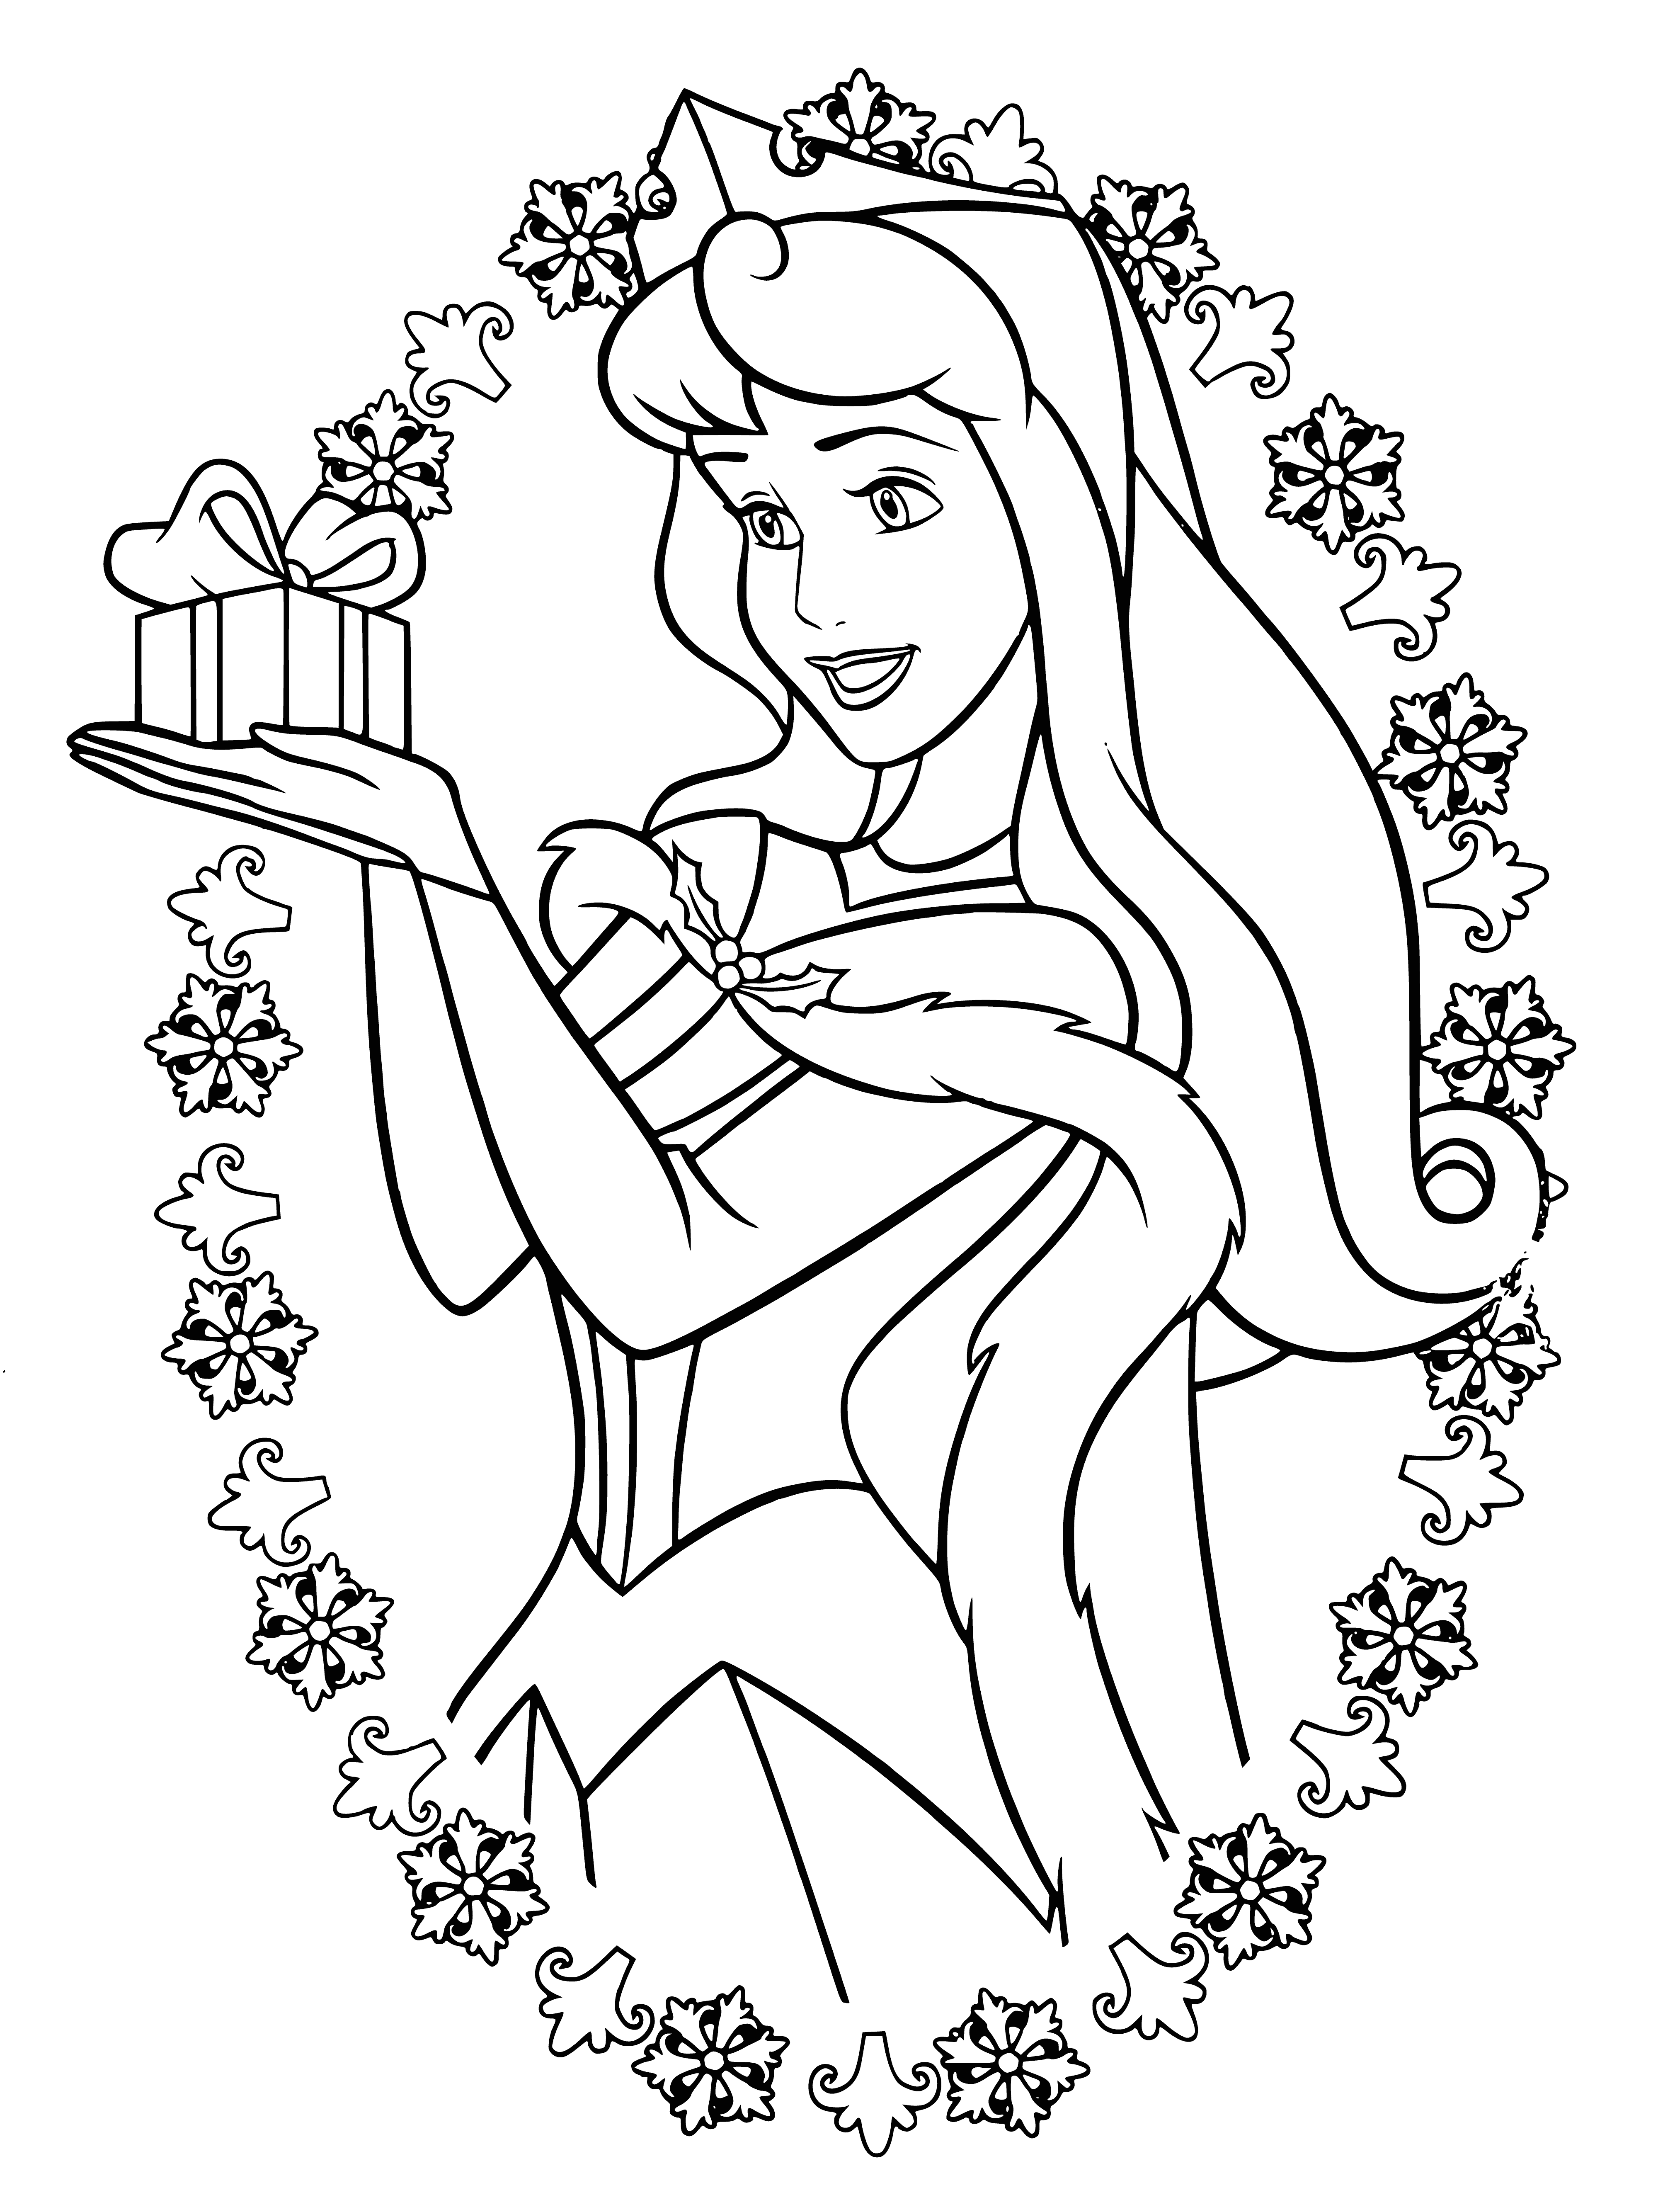 coloring page: Princesses celebrate the New Year. Aurora holds a gift, & the princesses smile happily & eagerly await 2021.